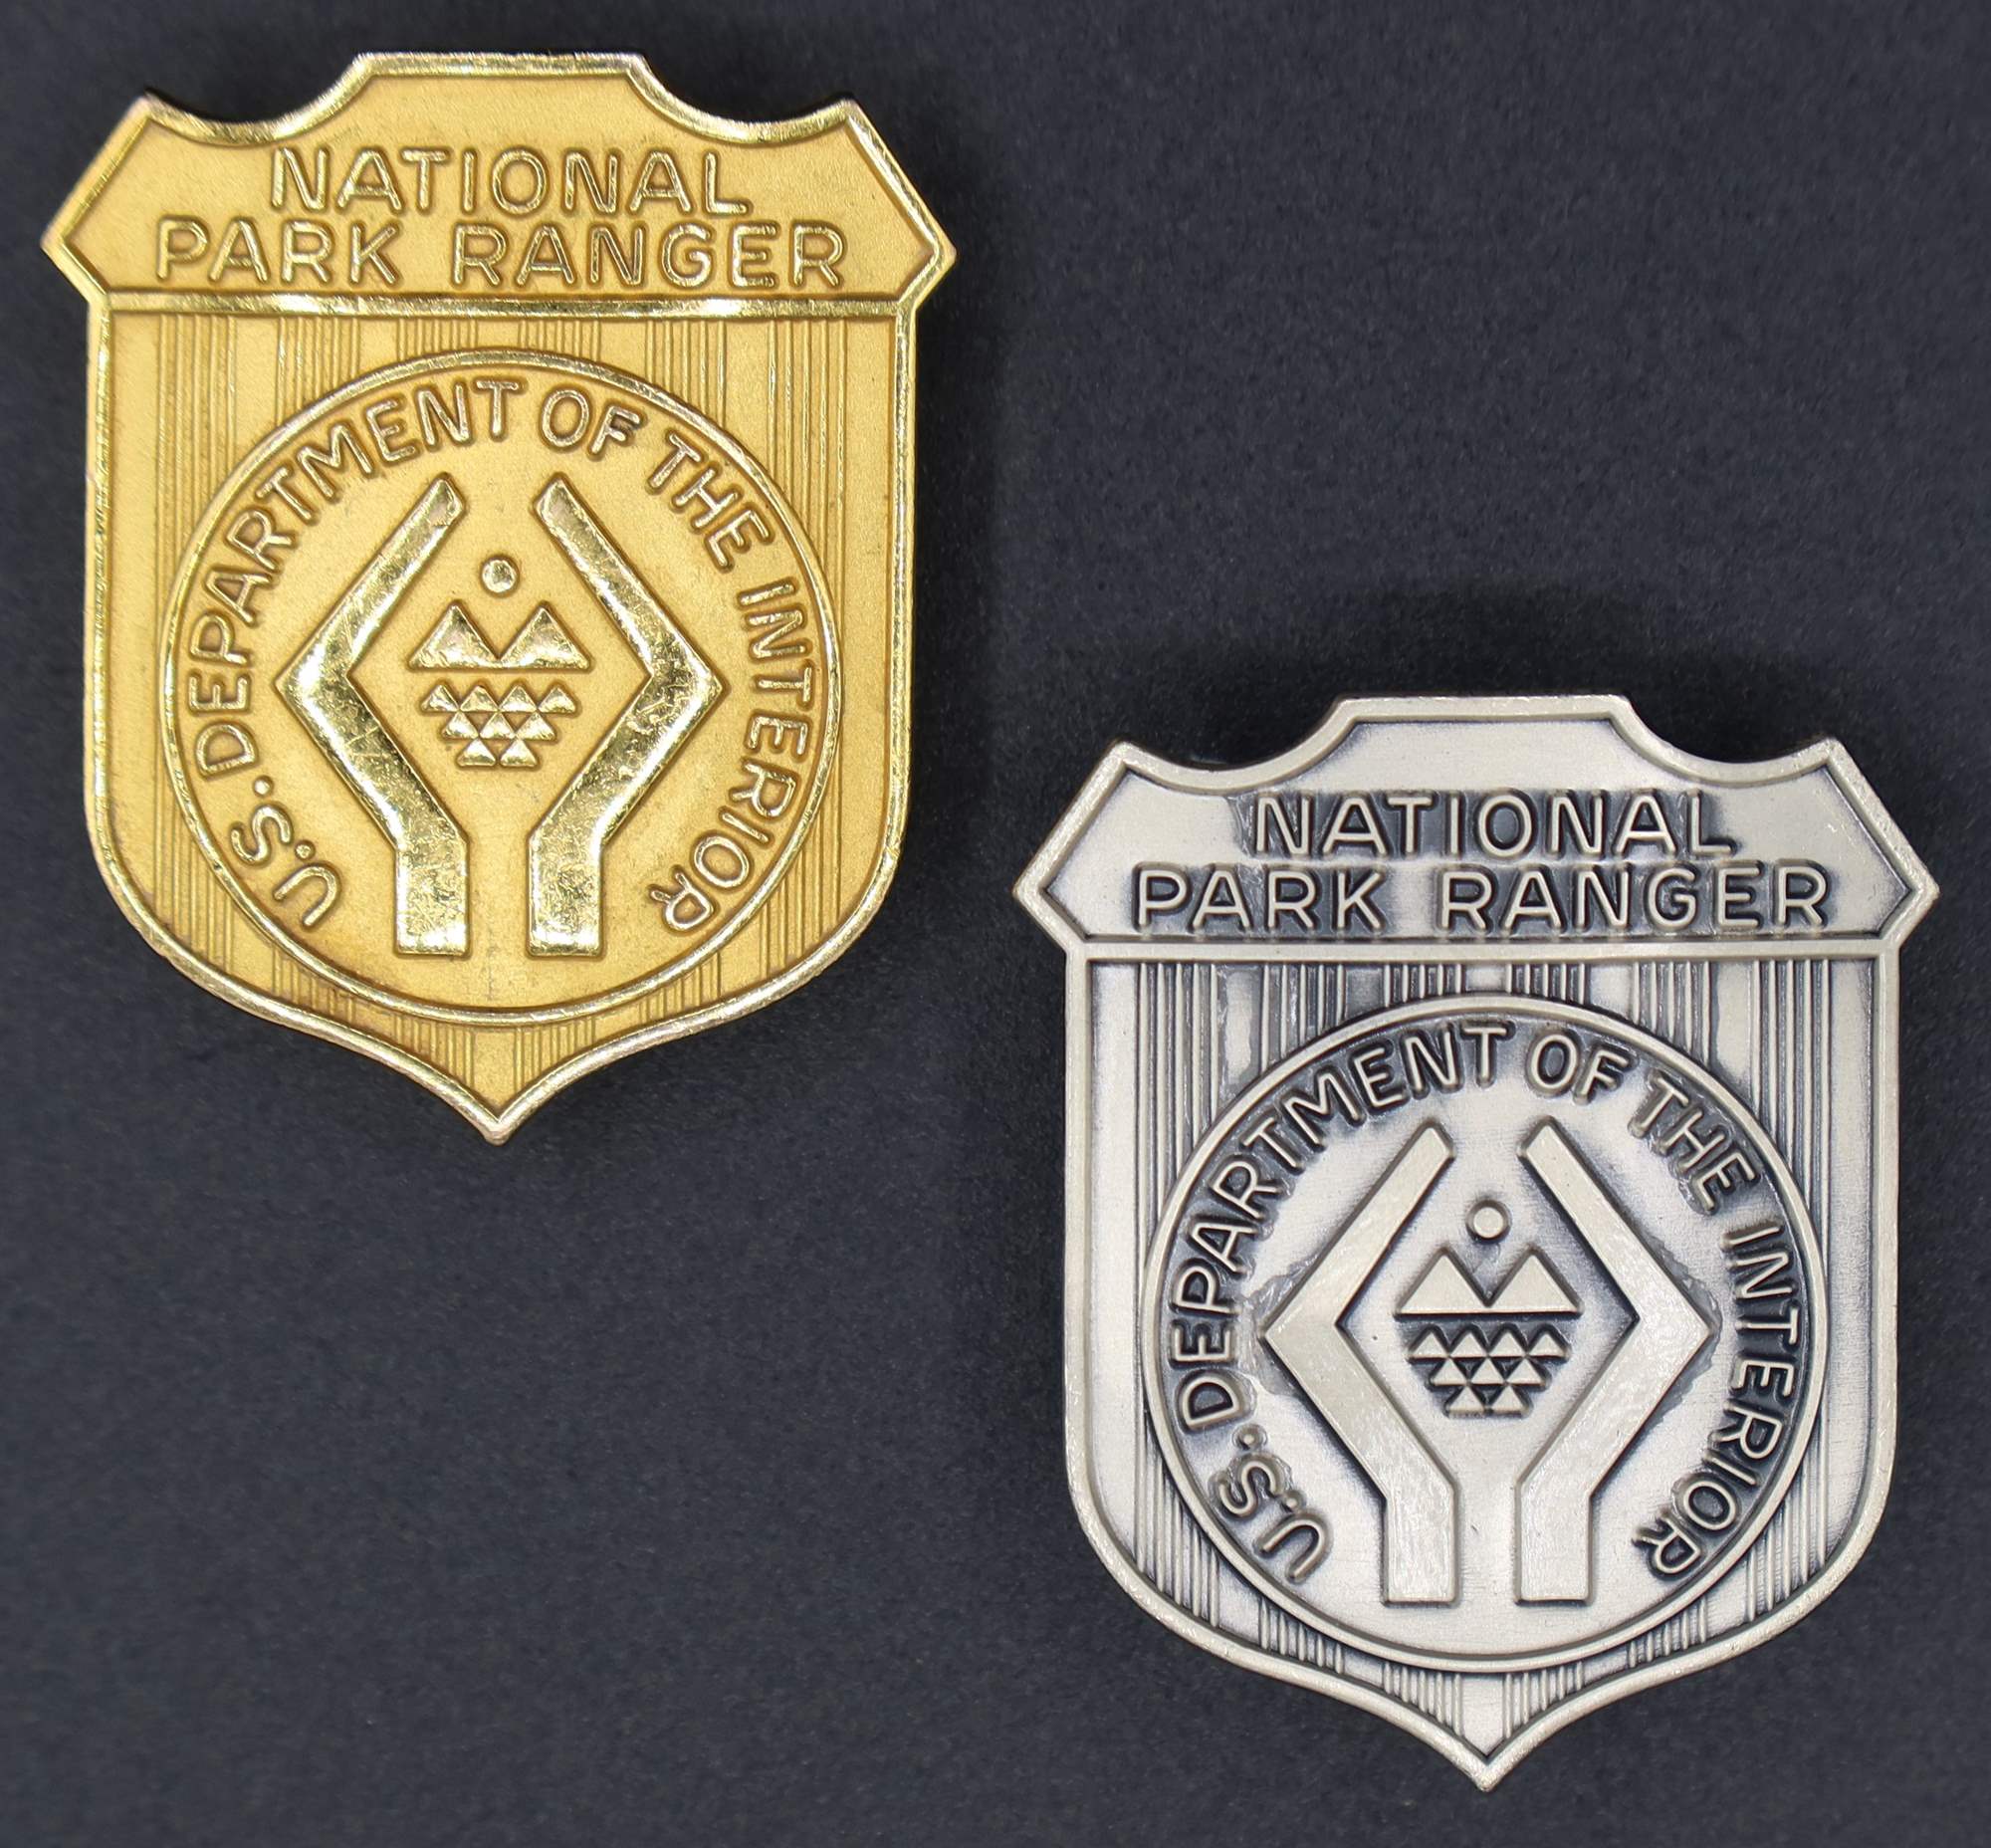 Gold National Park Ranger Superintendent Badge and Sterling Silver badge for all others